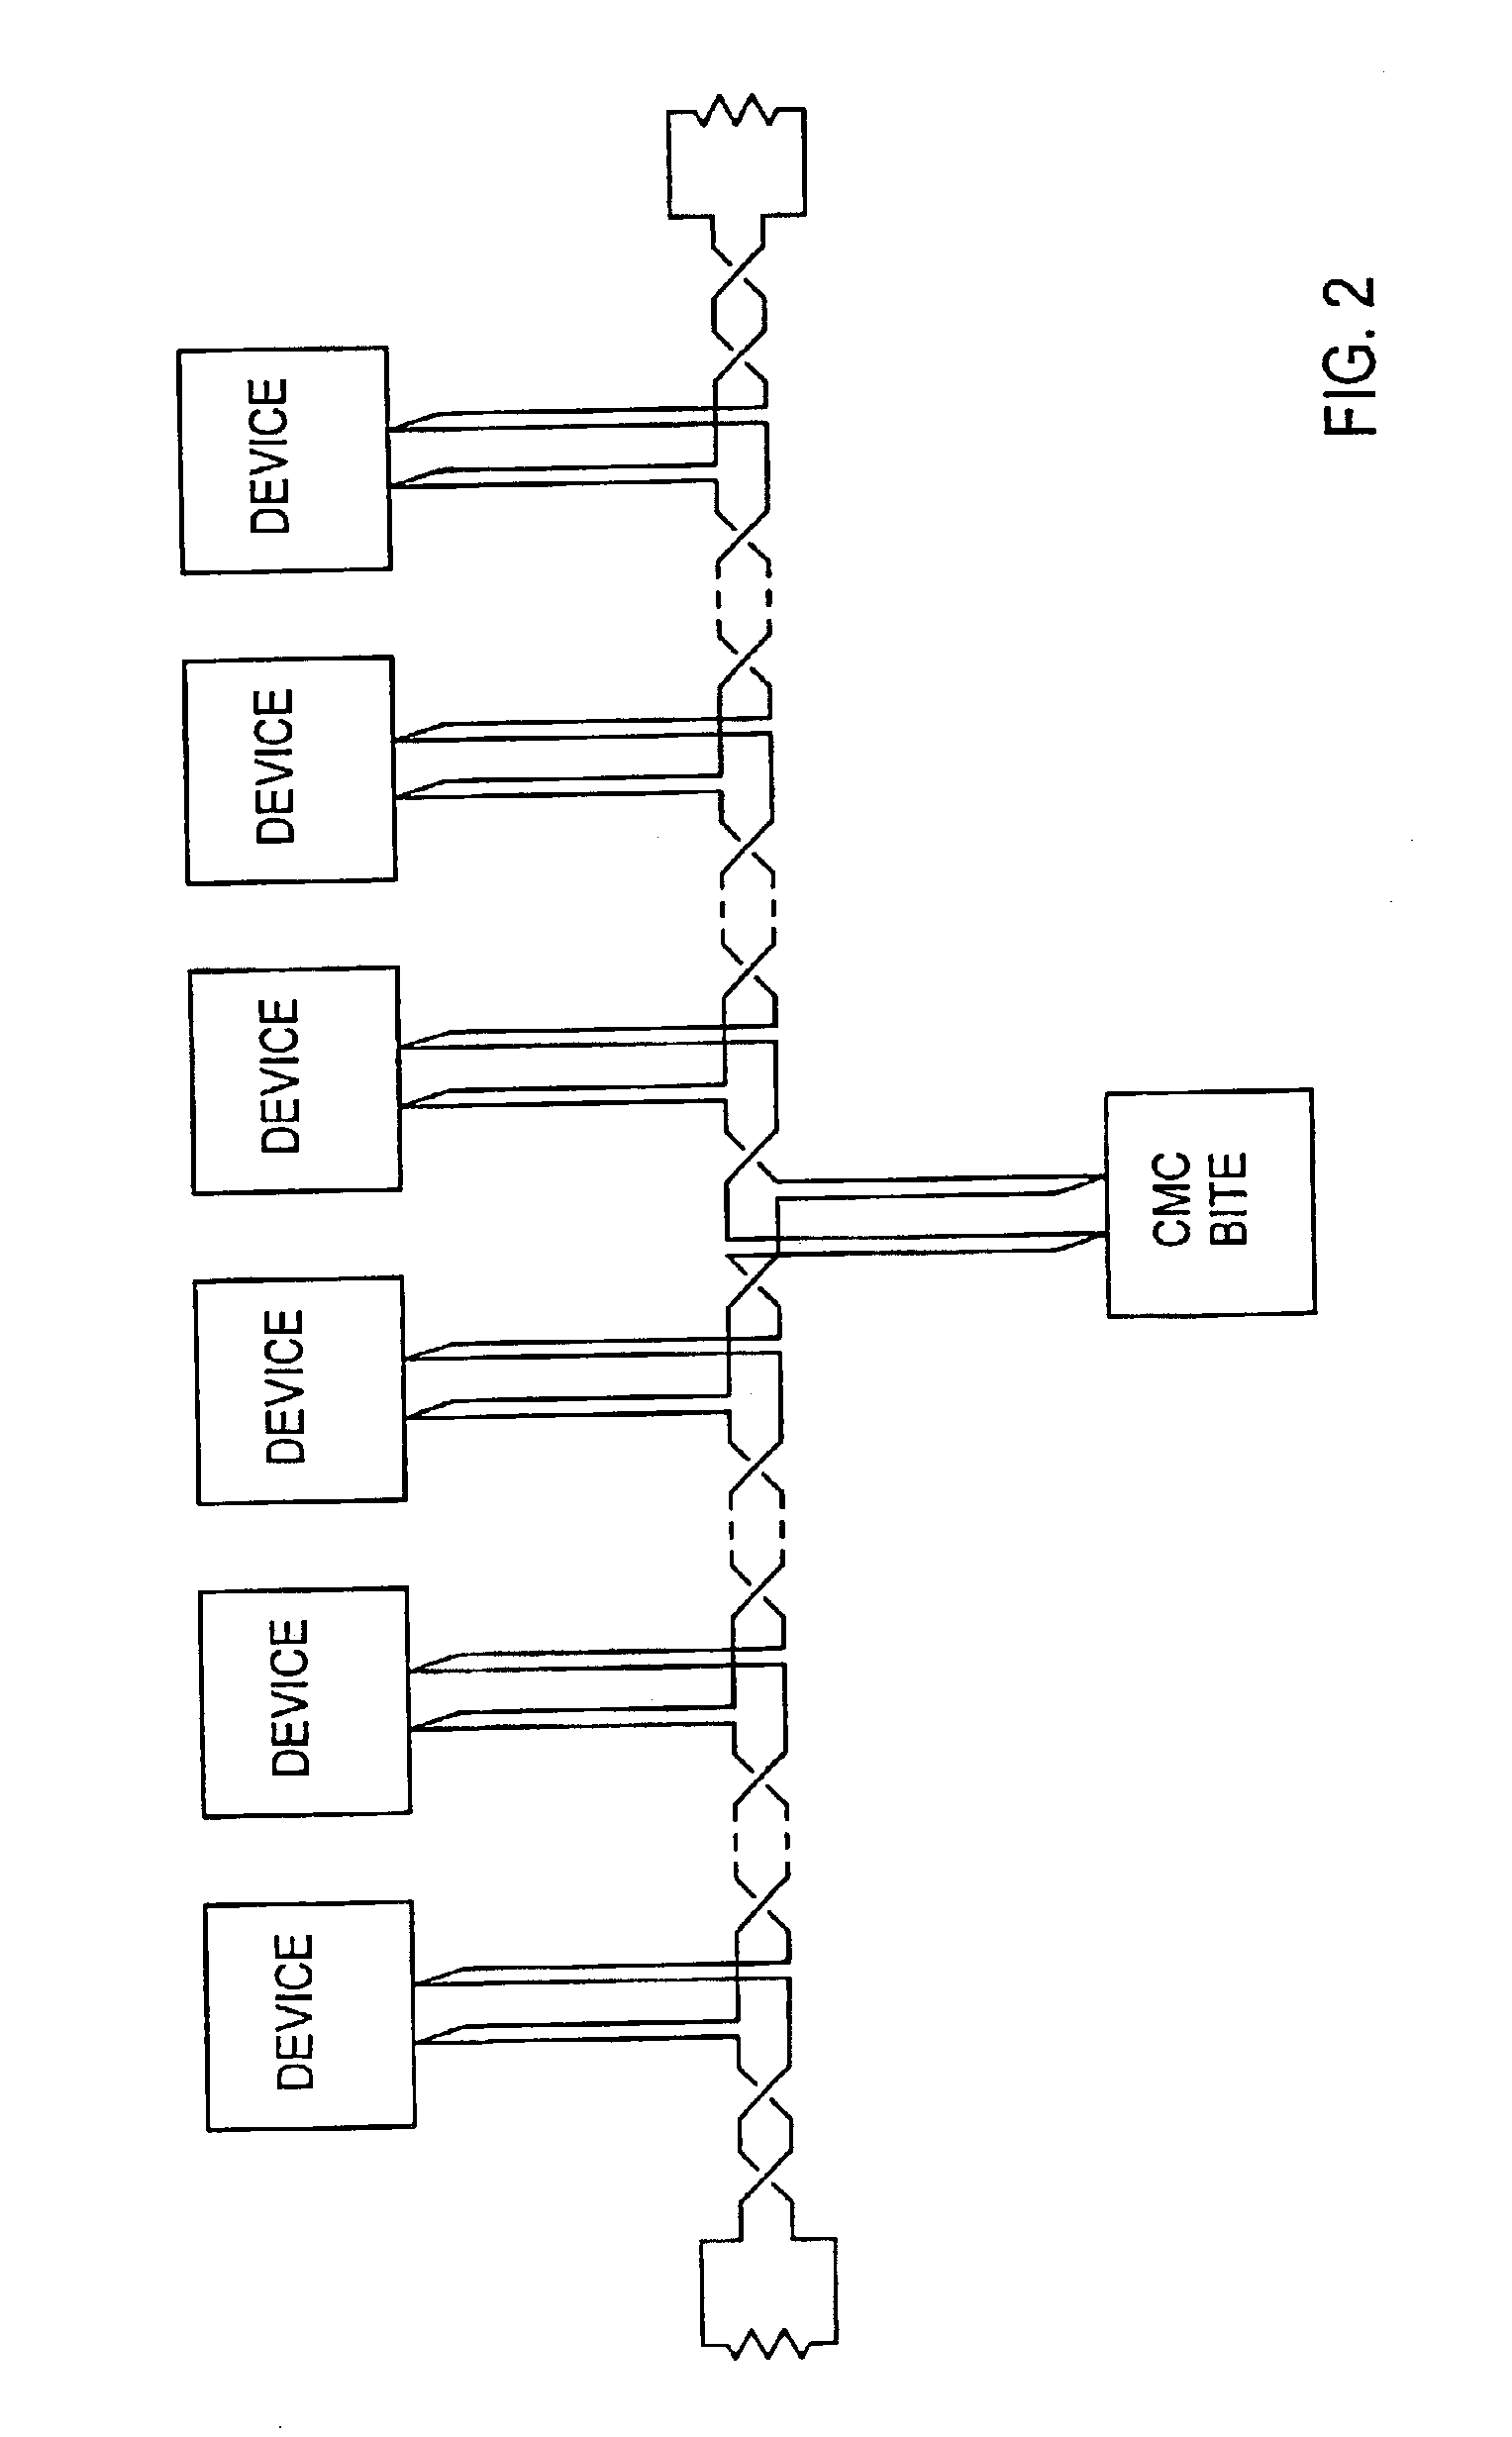 Freight-loading system for an aircraft